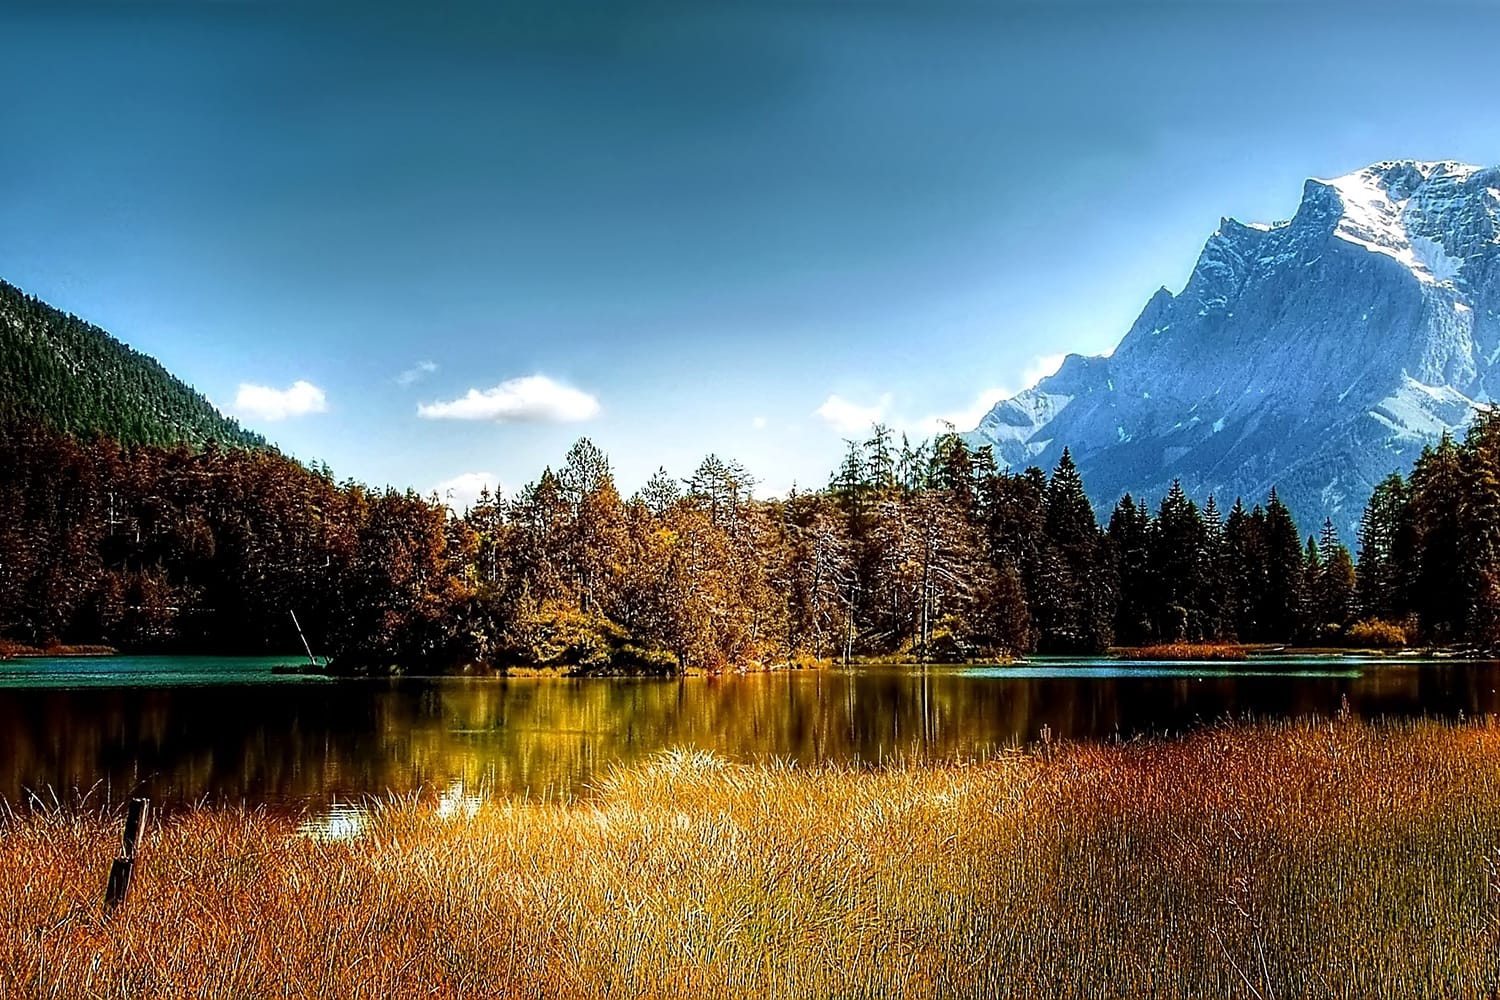 Can't-Miss Tips For Capturing Stunning Autumn Landscapes